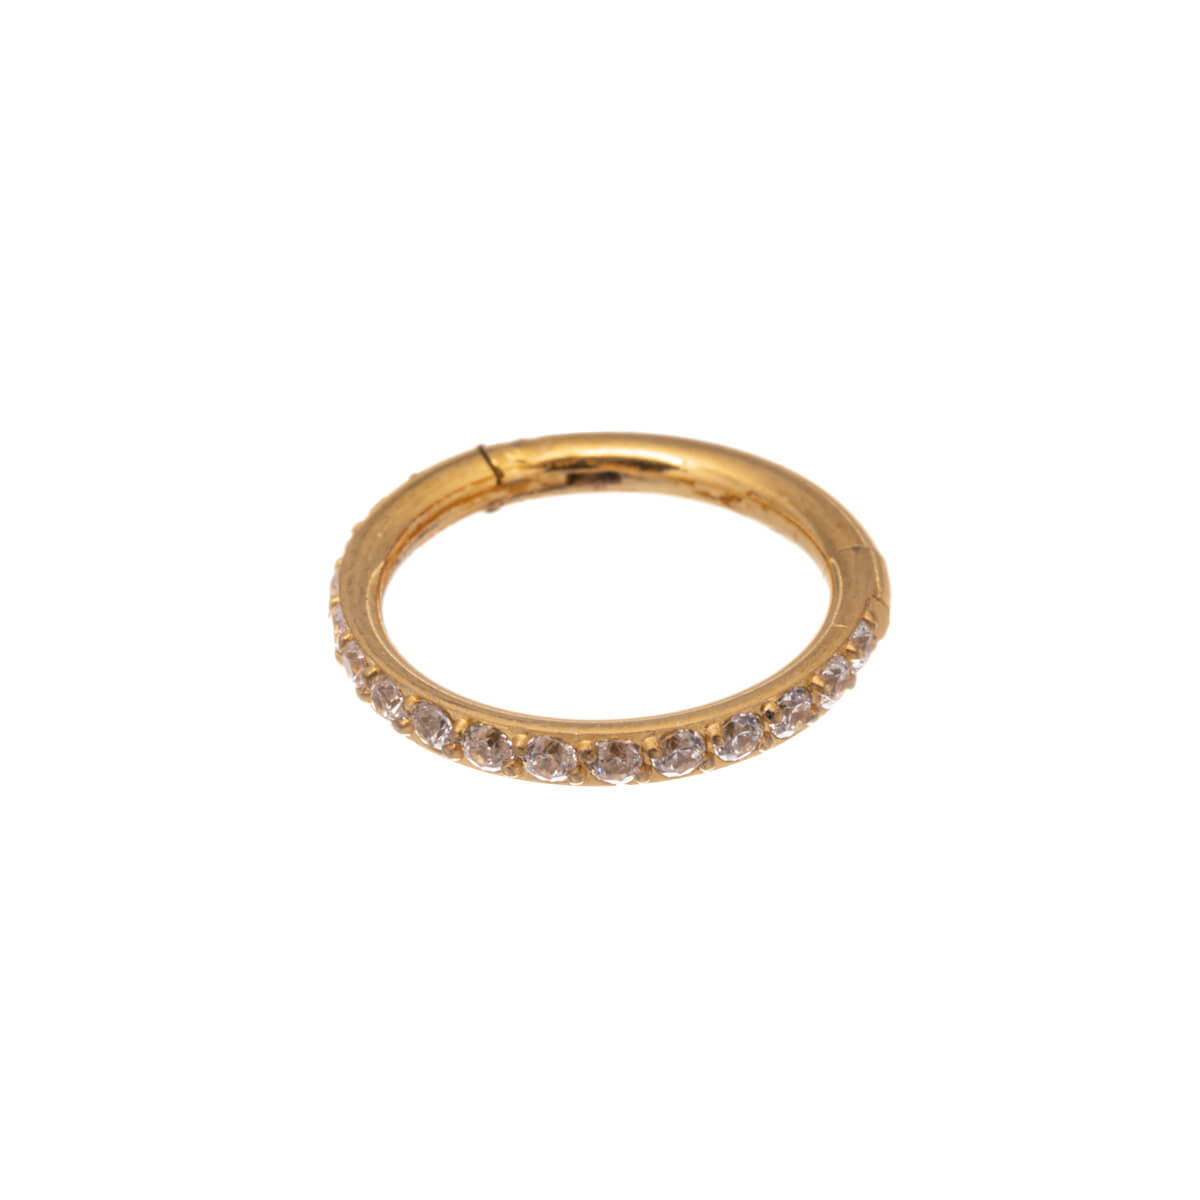 Gold plated hinged segment ring clicker pebbled 1.2mm (steel 316L)